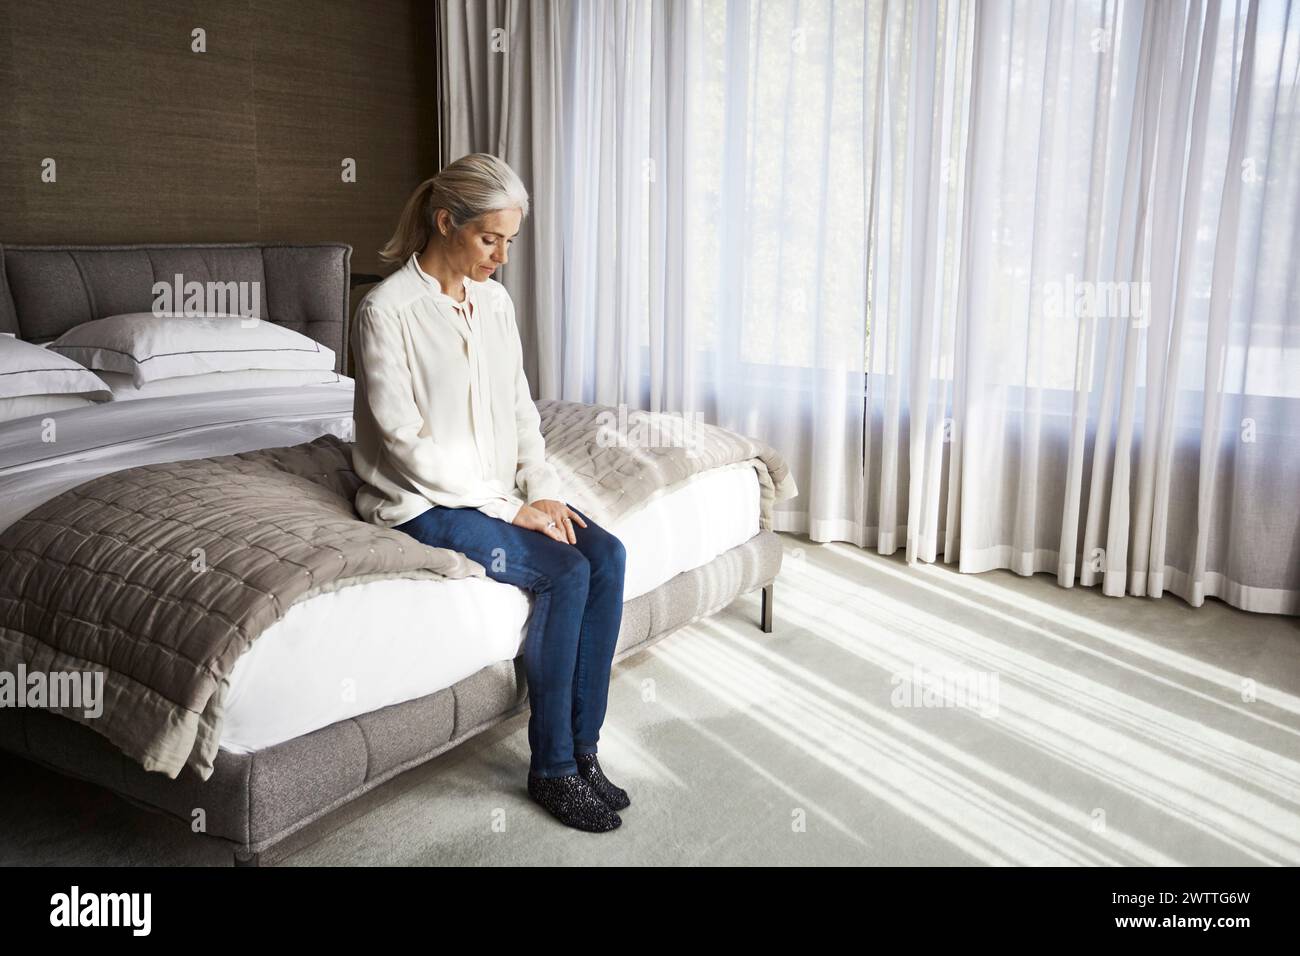 Woman sitting pensively on a bed in a well-lit room Stock Photo